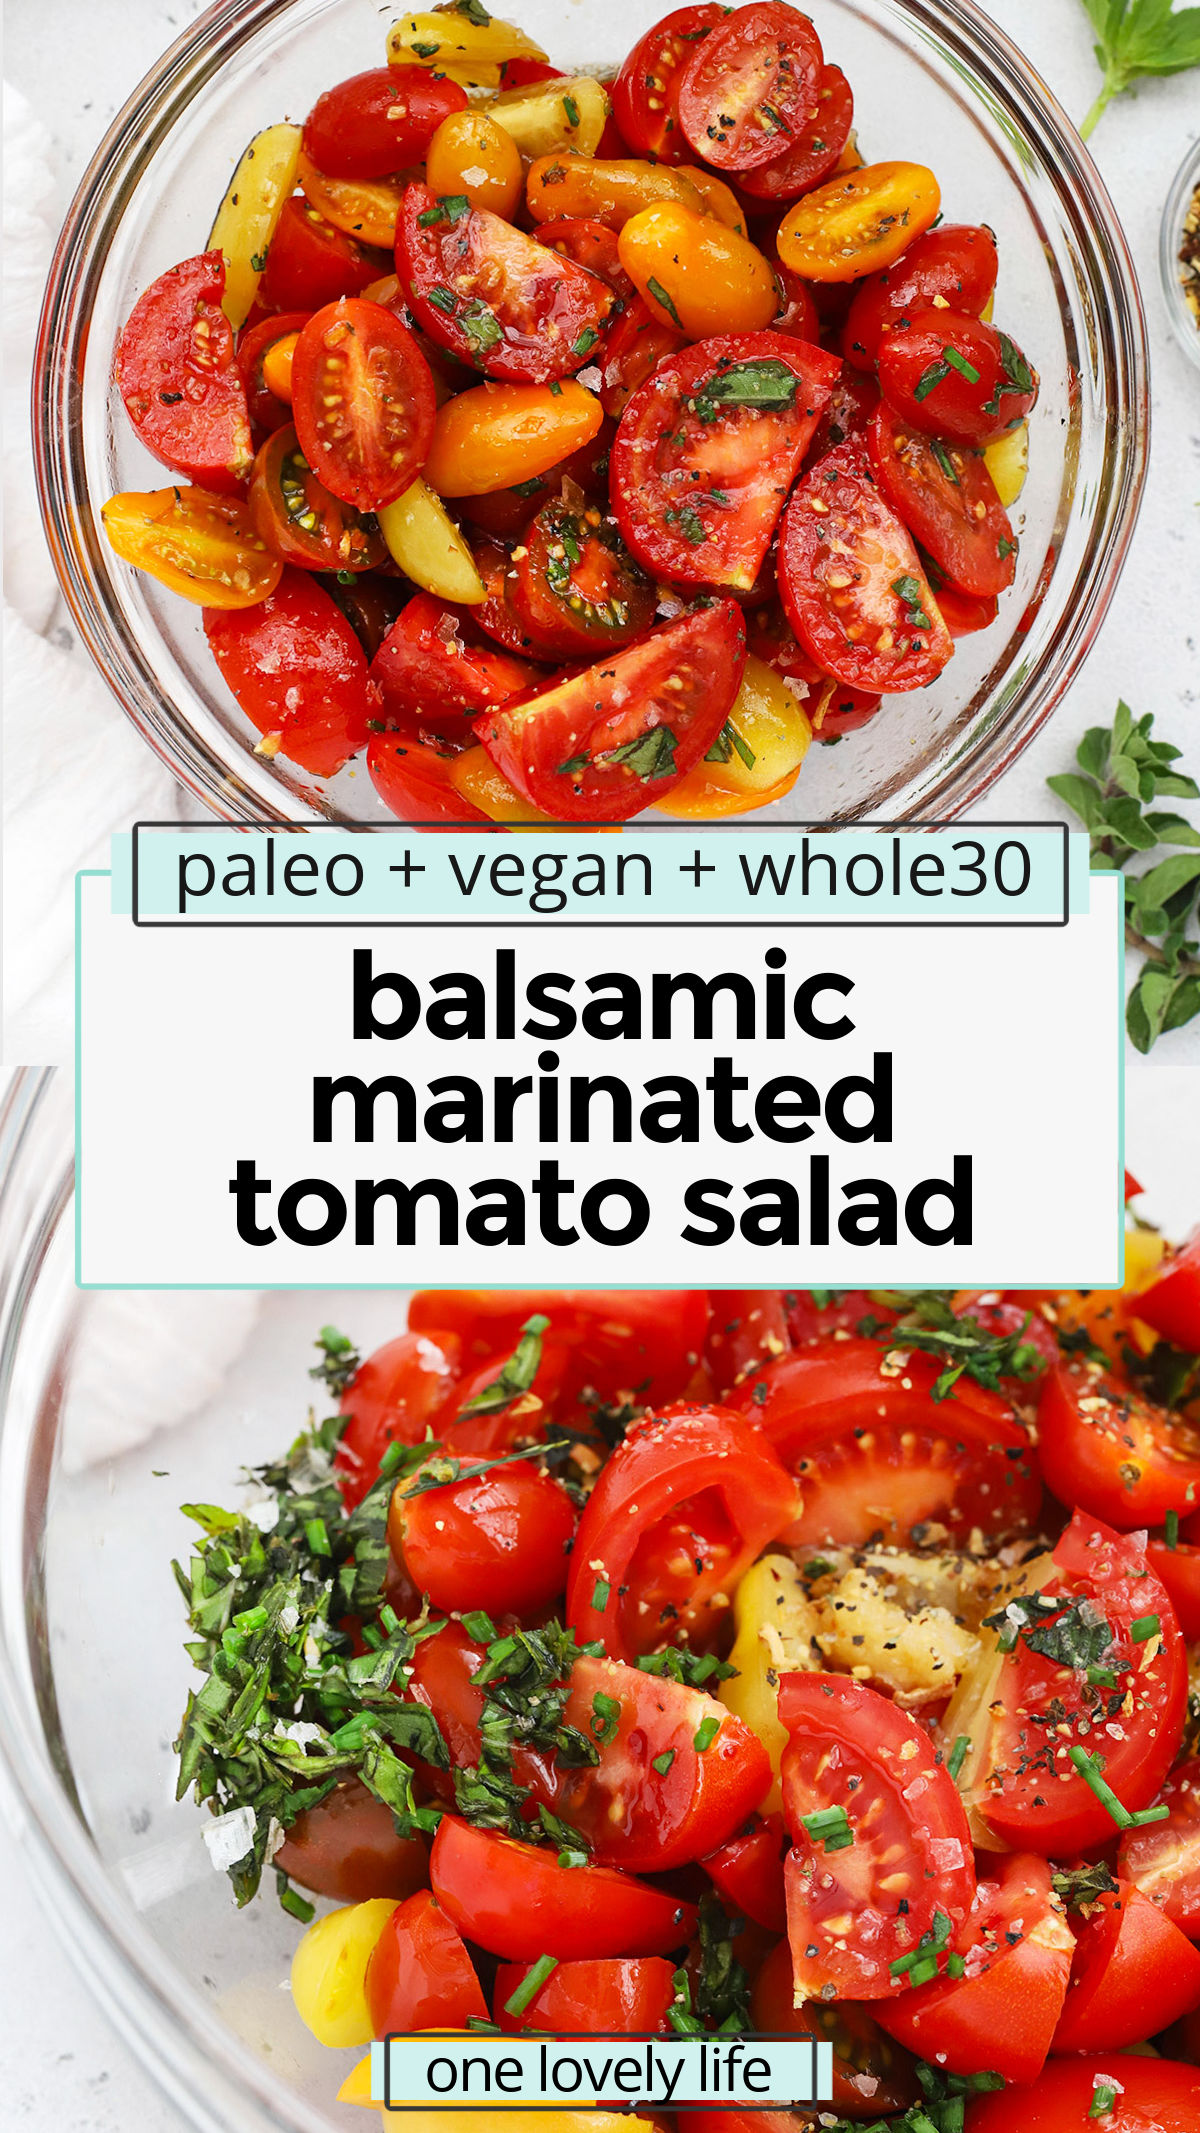 Easy Balsamic Marinated Tomato Salad - You only need 6 ingredients to make delicious balsamic marinated tomatoes. Serve them as a fresh side, or use them as a topping! // balsamic tomatoes // marinated tomatoes // tomato salad recipe // tomato dressing // summer side dish // healthy tomato recipe // healthy salad // side salad // tomato side dish // paleo // whole30 // vegan // vegetarian // gluten-free